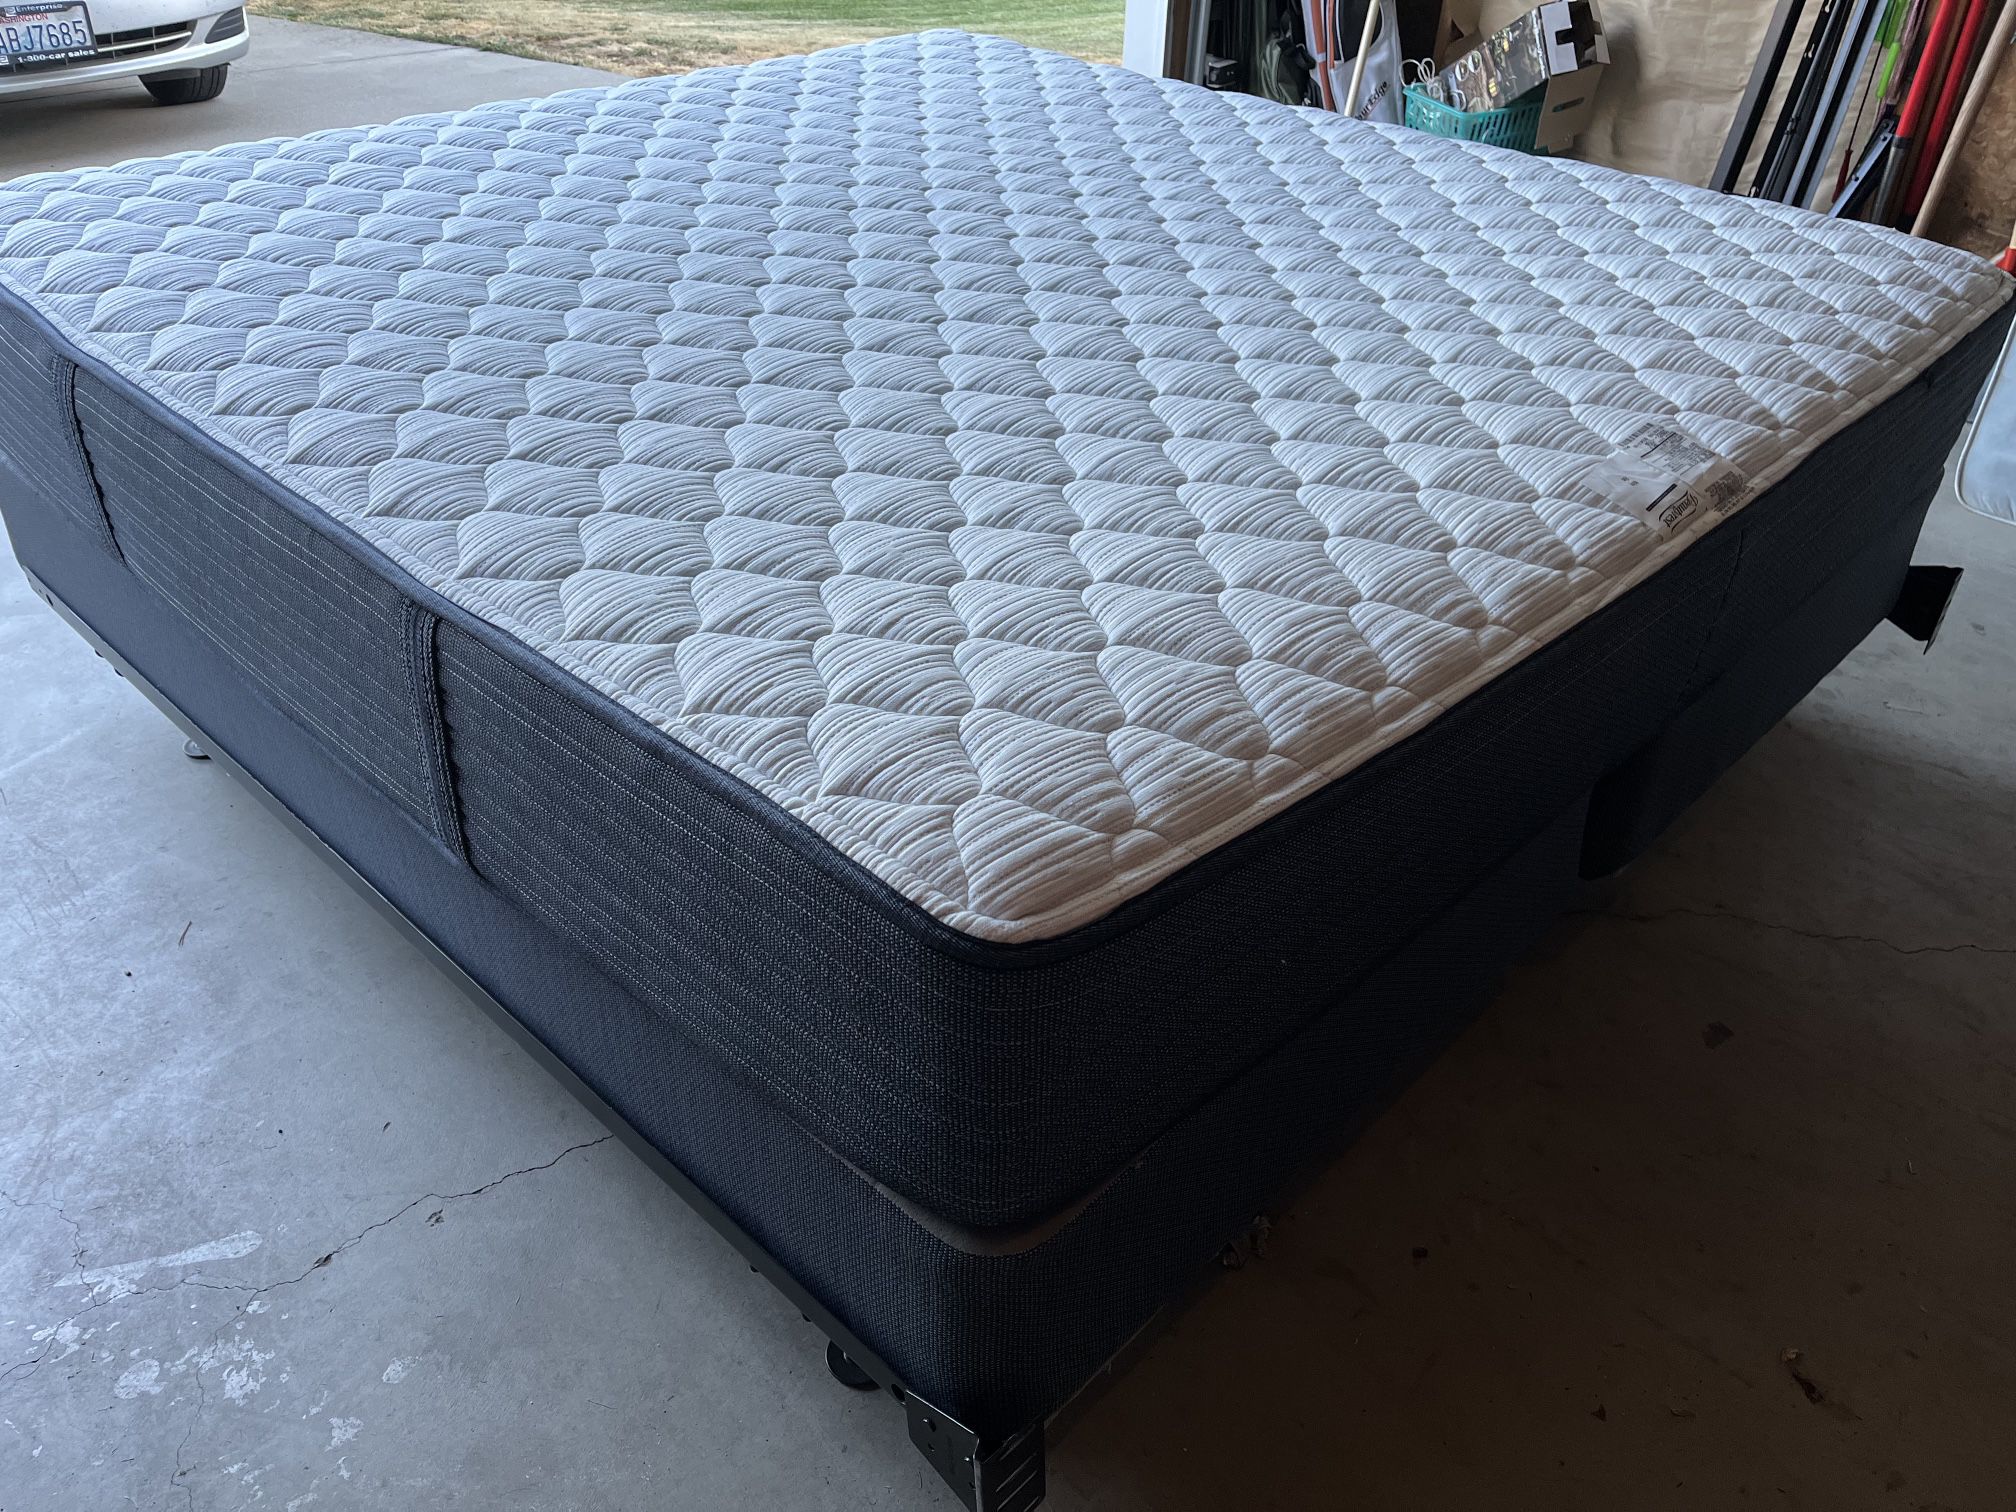 King Mattress, Almost New, Used a Few Months Only. 